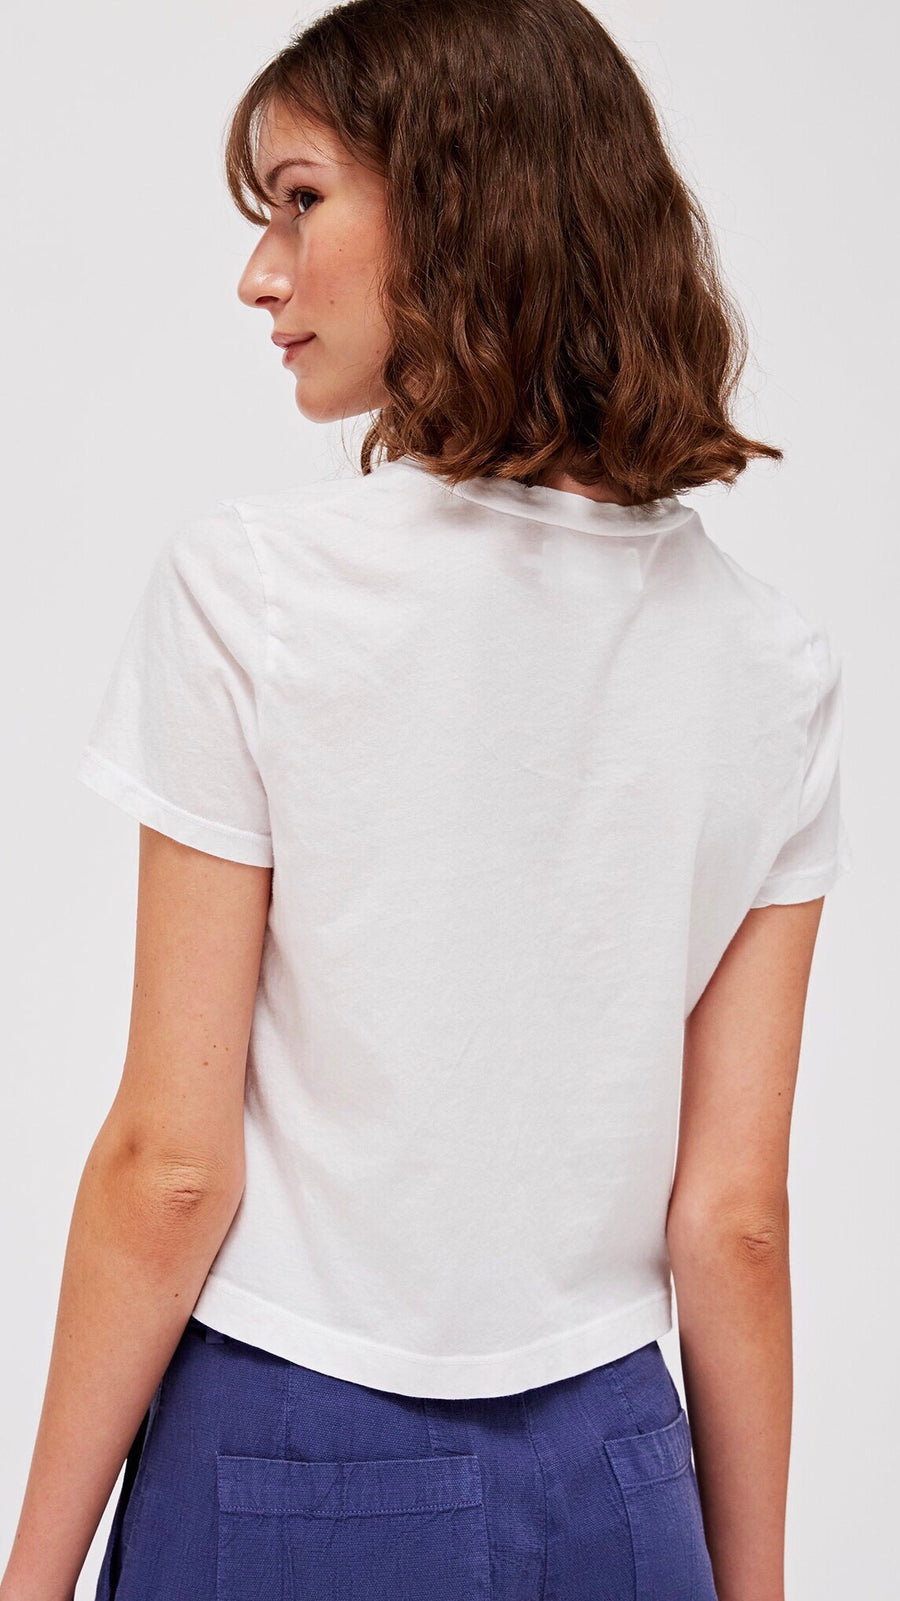 Foster Tee in White by Lacausa Clothing